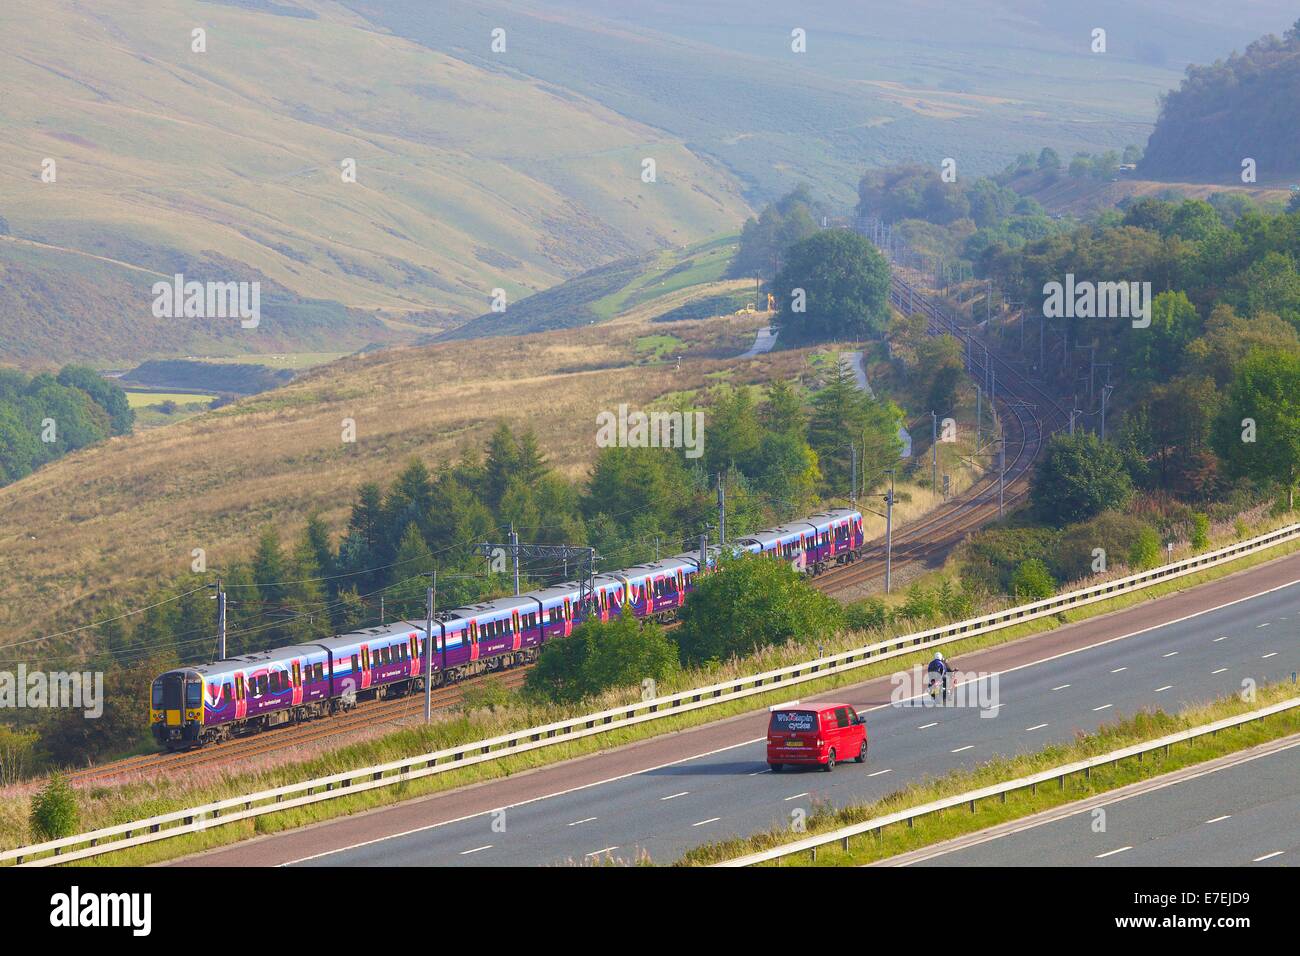 First Group Trans Pennine Express, Class 185 train passing the M6 motorway in the River Lune Valley. Howgills, Cumbria, UK. Stock Photo